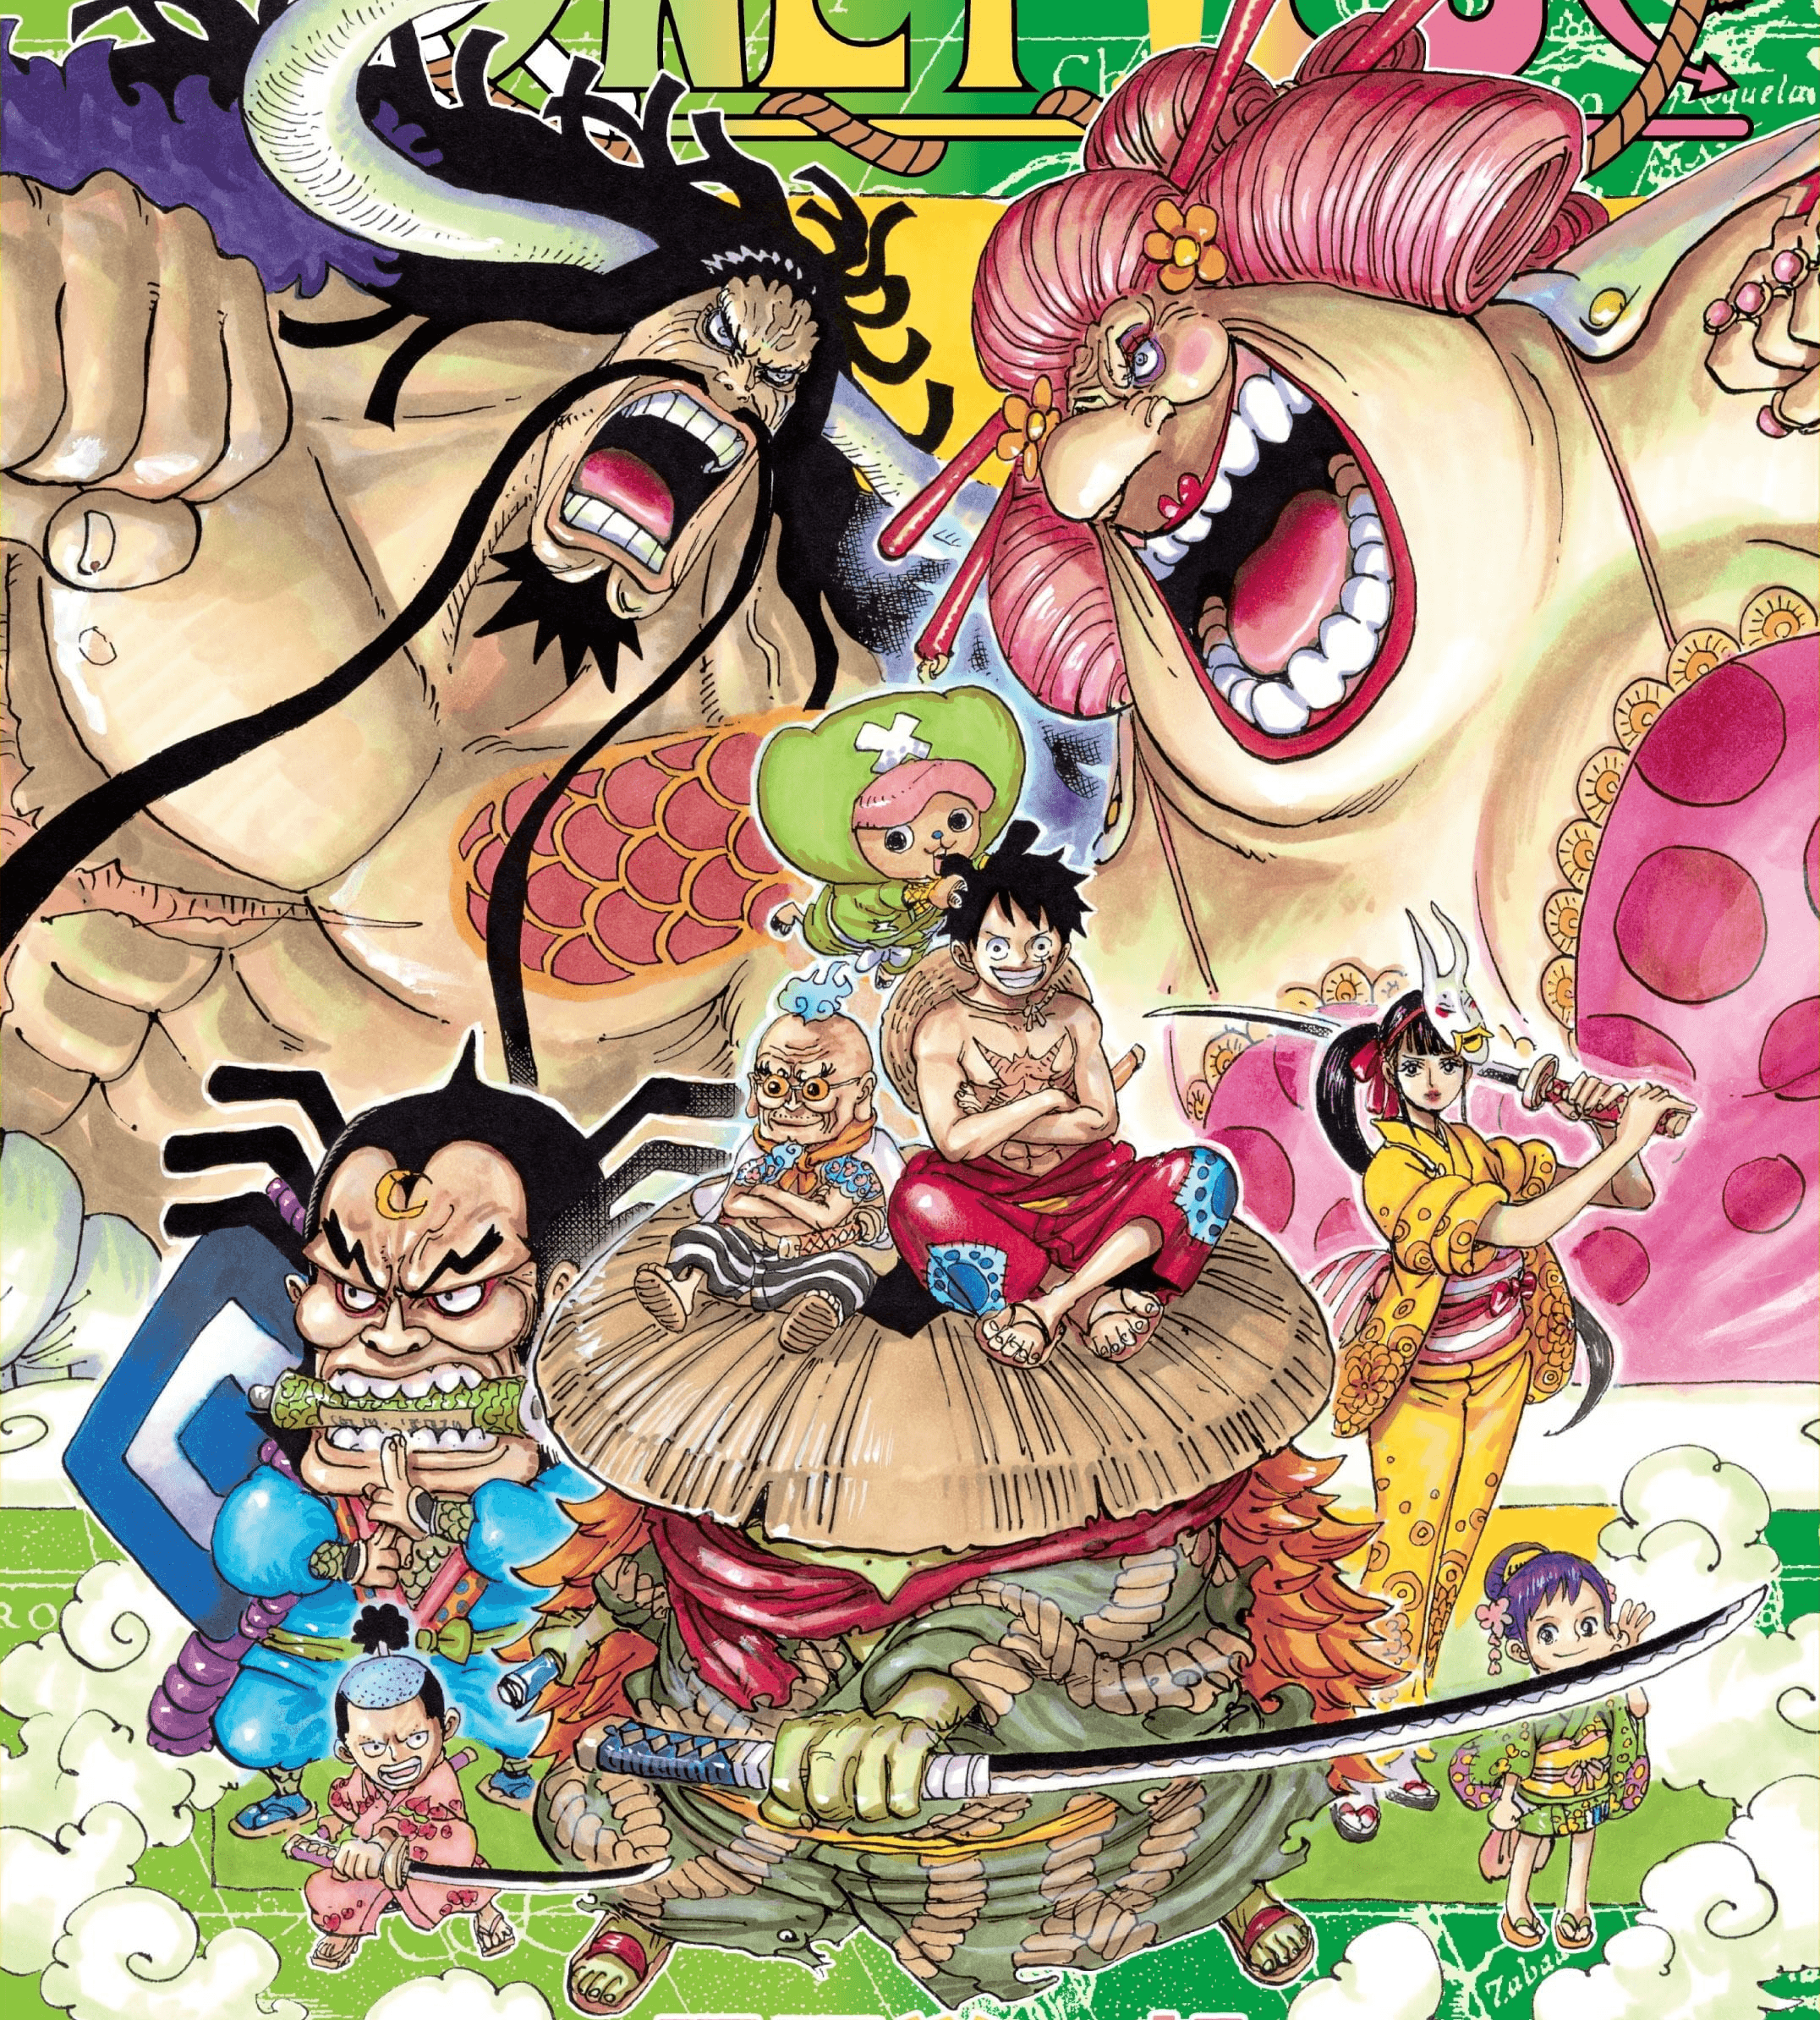 Wano Country Arc